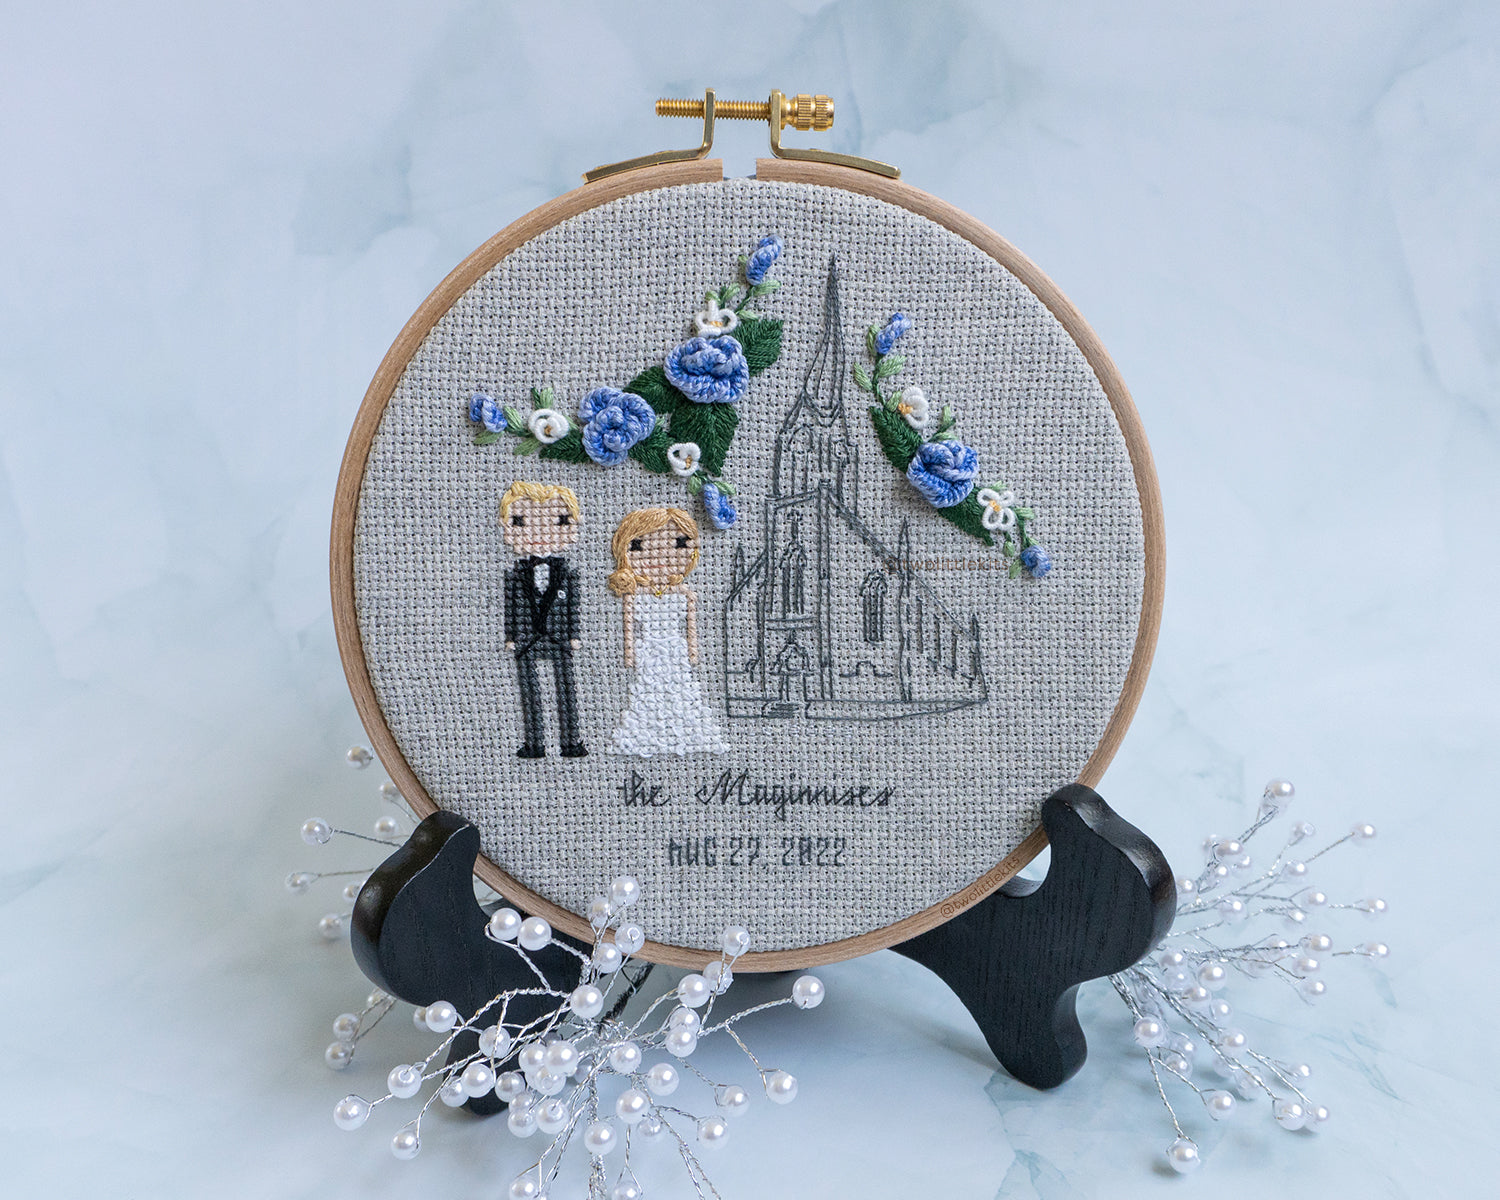 A cross-stitched bride and groom next to an outlined church building. In the "white space" there is blue and white hand stitched florals. The piece is framed in a wooden embroidery hoop and reads "The Maginises"